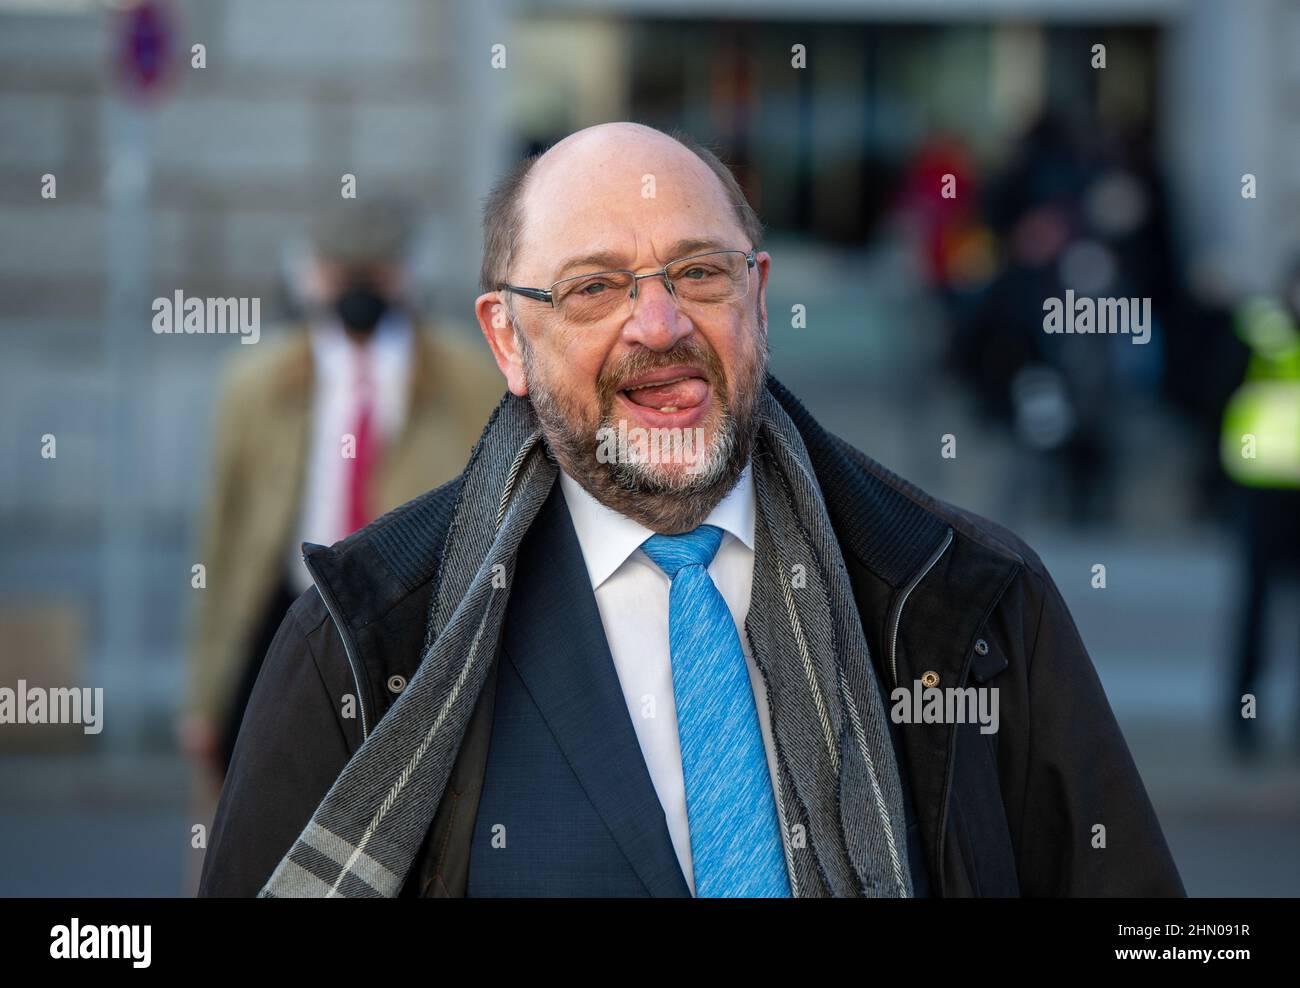 Berlin, Germany. 13th Feb, 2022. Martin Schulz (SPD) arrives at the Paul Löbe House for the election of the Federal President by the Federal Assembly. Credit: Christophe Gateau/dpa/Alamy Live News Stock Photo